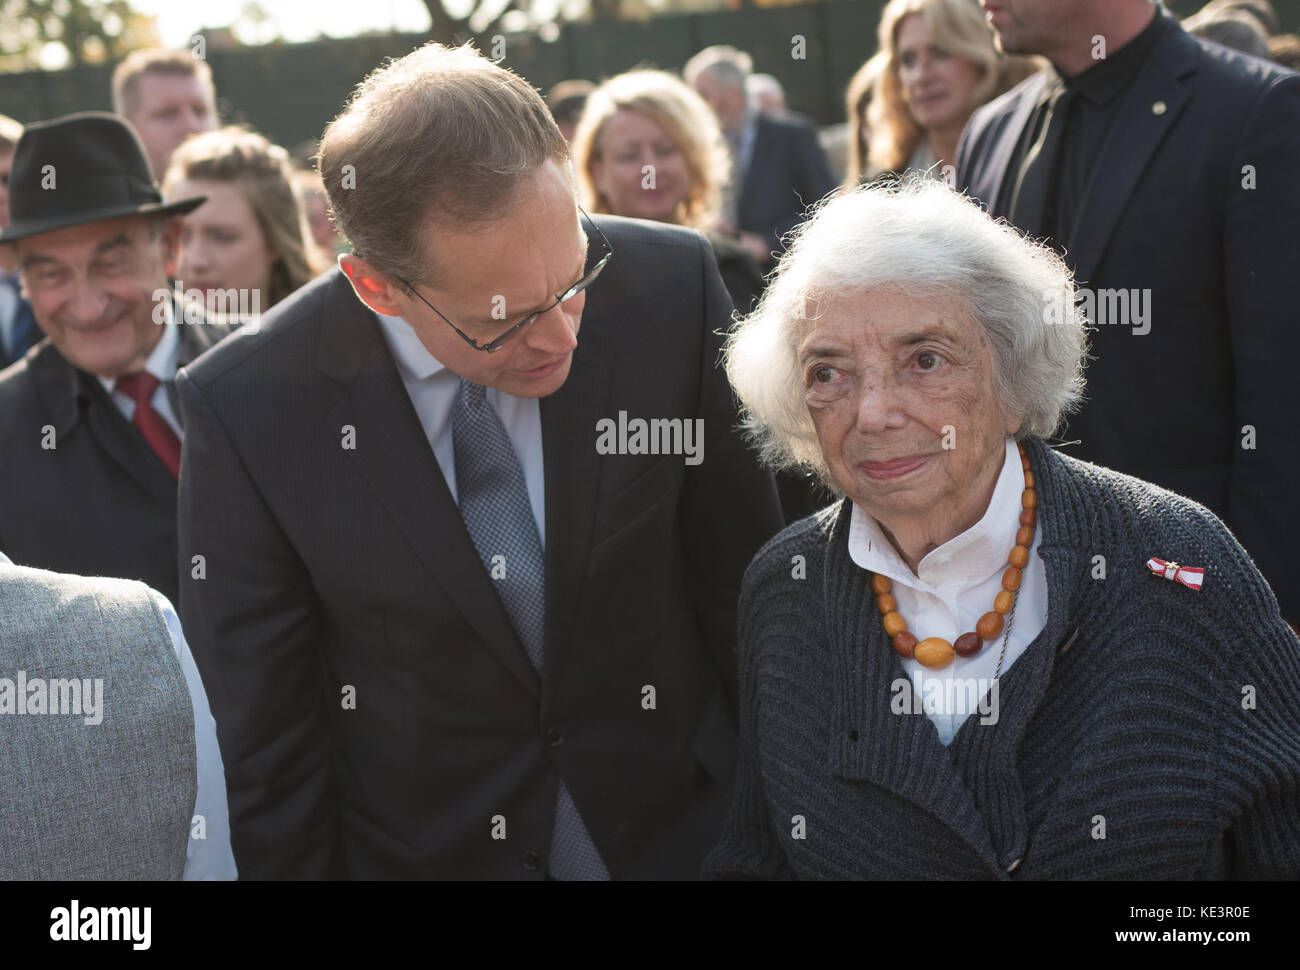 Berlin, Germany. 18th Oct, 2017. Berlin's mayor Michael Mueller from the Social Democratic Party of Germany (SPD) and the Holocaust survivor Margot Friedlaender commemorate the begin of the national socialist deportation of Berlin jews 76 years ago in Berlin, Germany, 18 October 2017. Credit: Jörg Carstensen/dpa/Alamy Live News Stock Photo